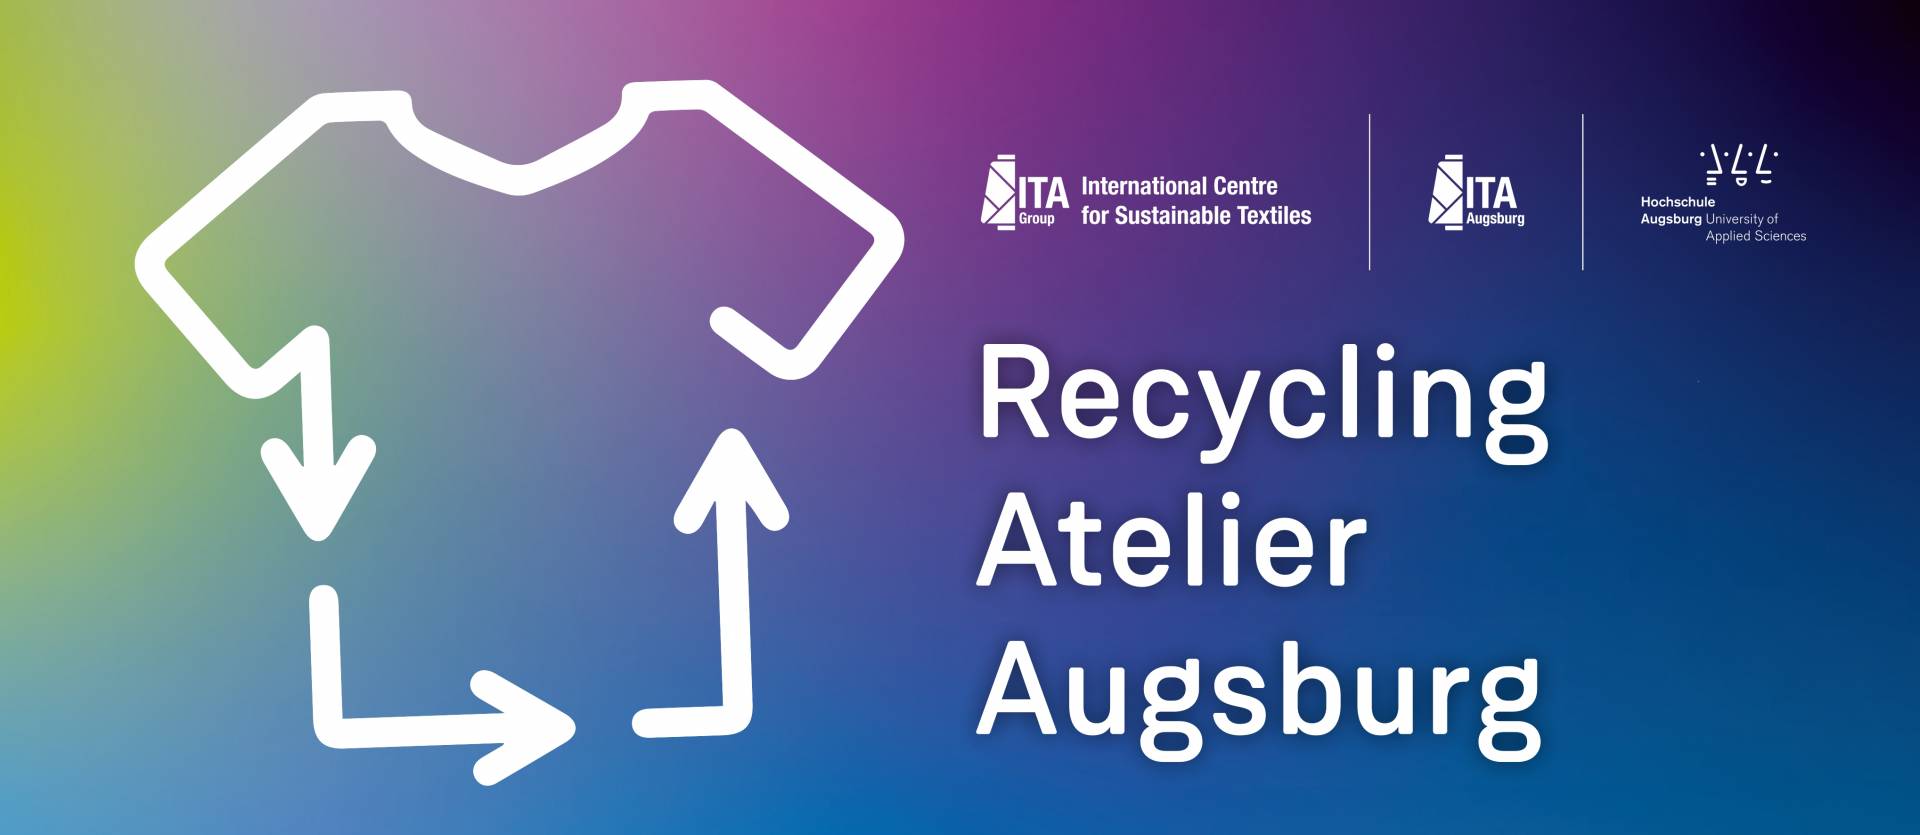 Banner: Recycling Atelier Augsburg